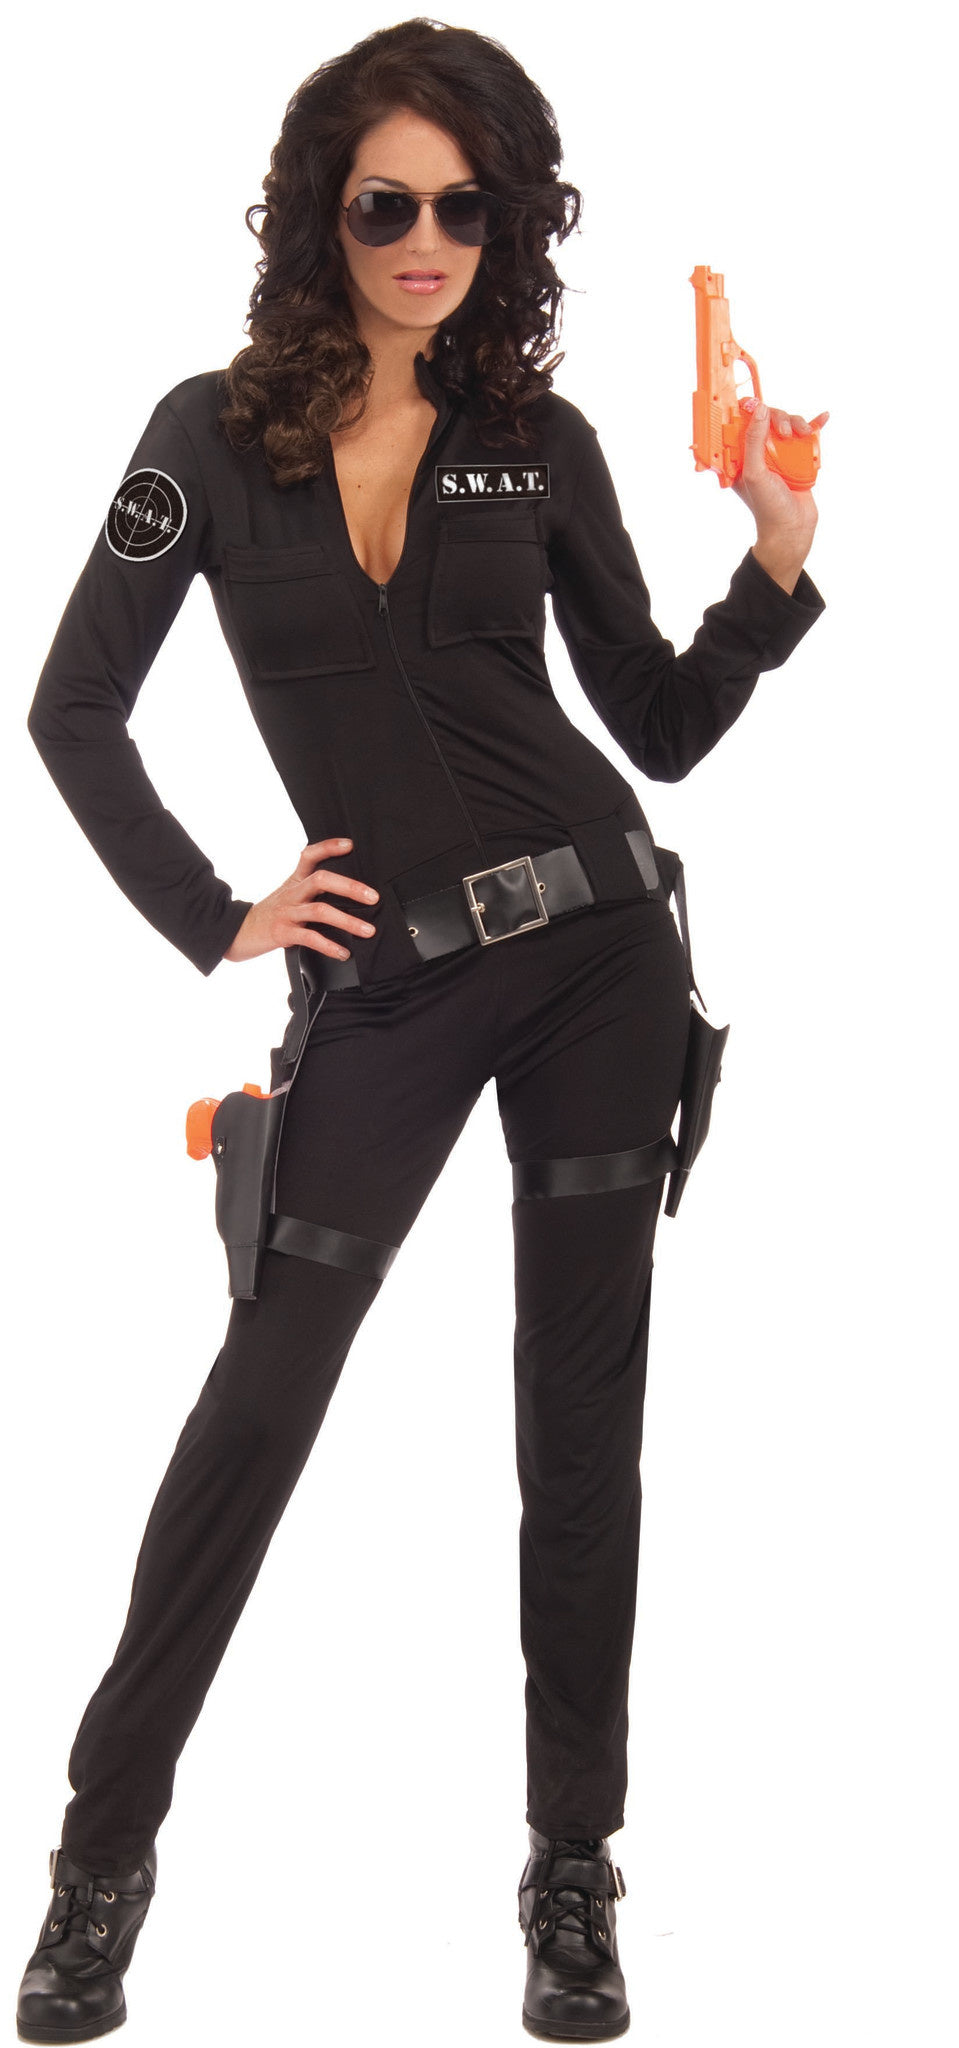 Adult S.W.A.T.  Costume